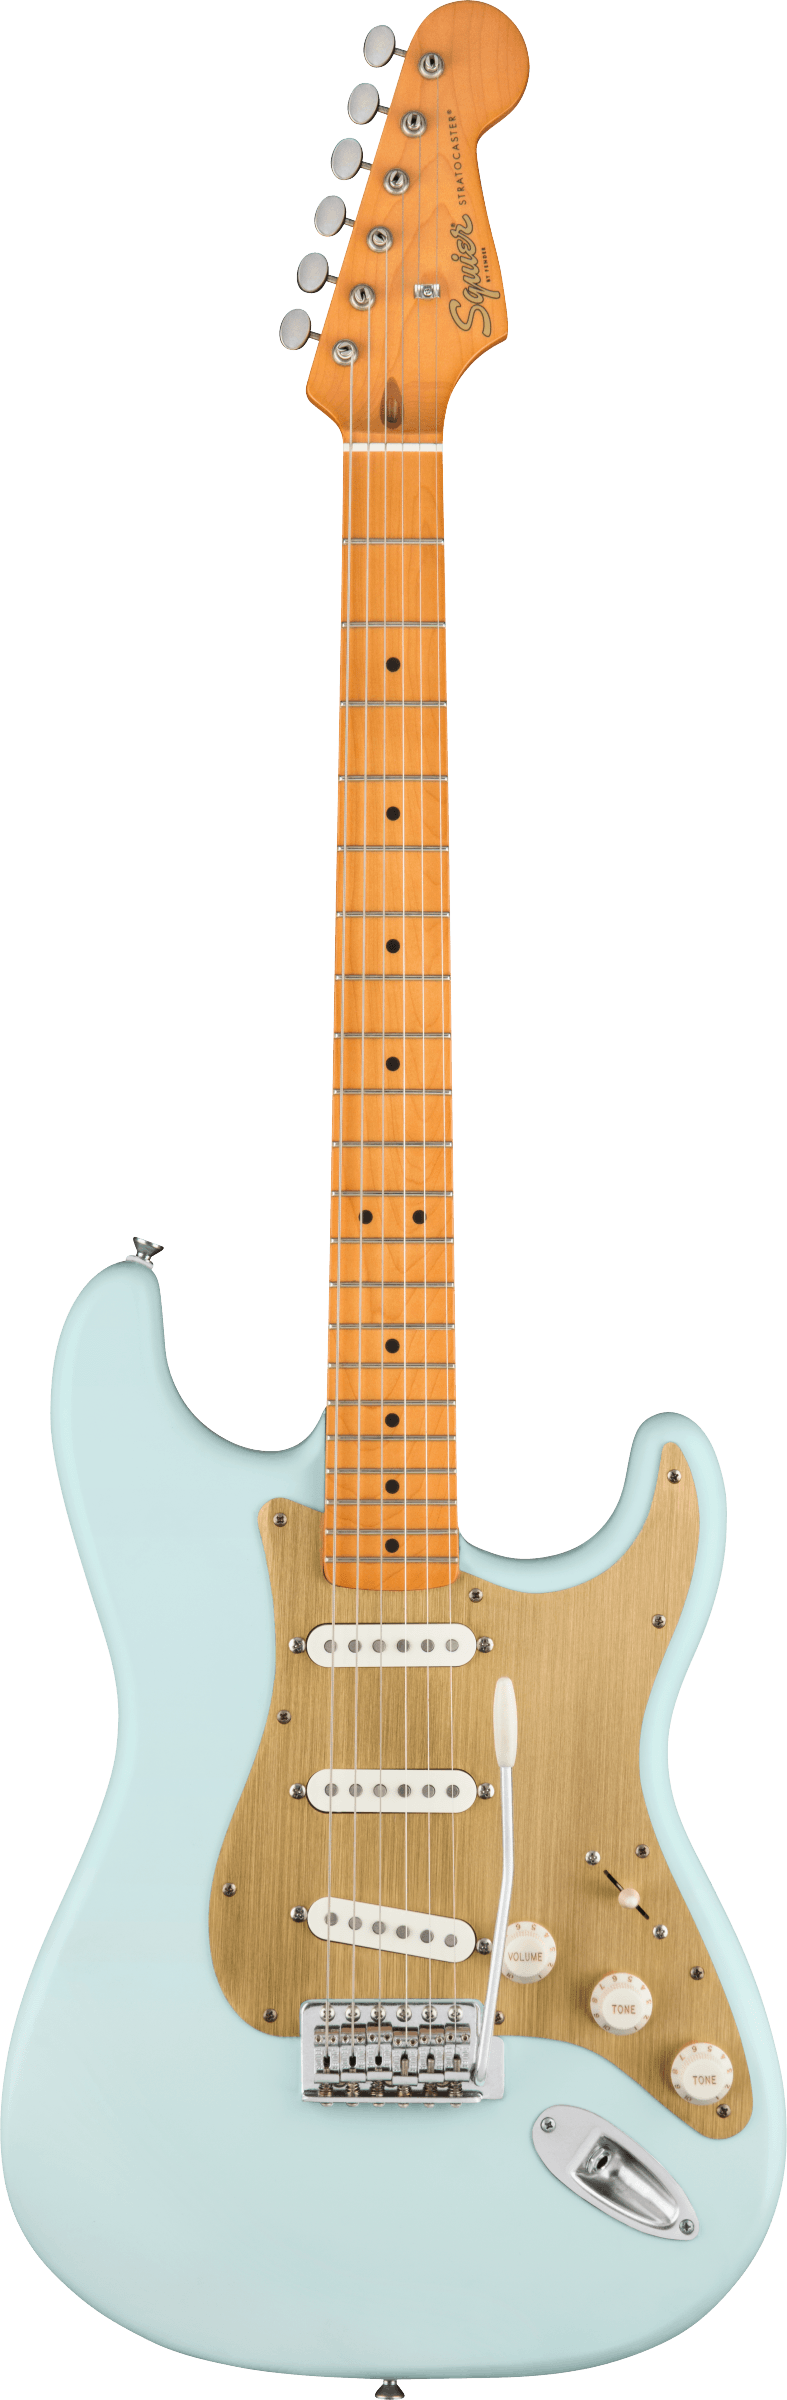 Squier 40th Anniversary Stratocaster, Vintage Edition, Satin Sonic Blue - Regent Sounds